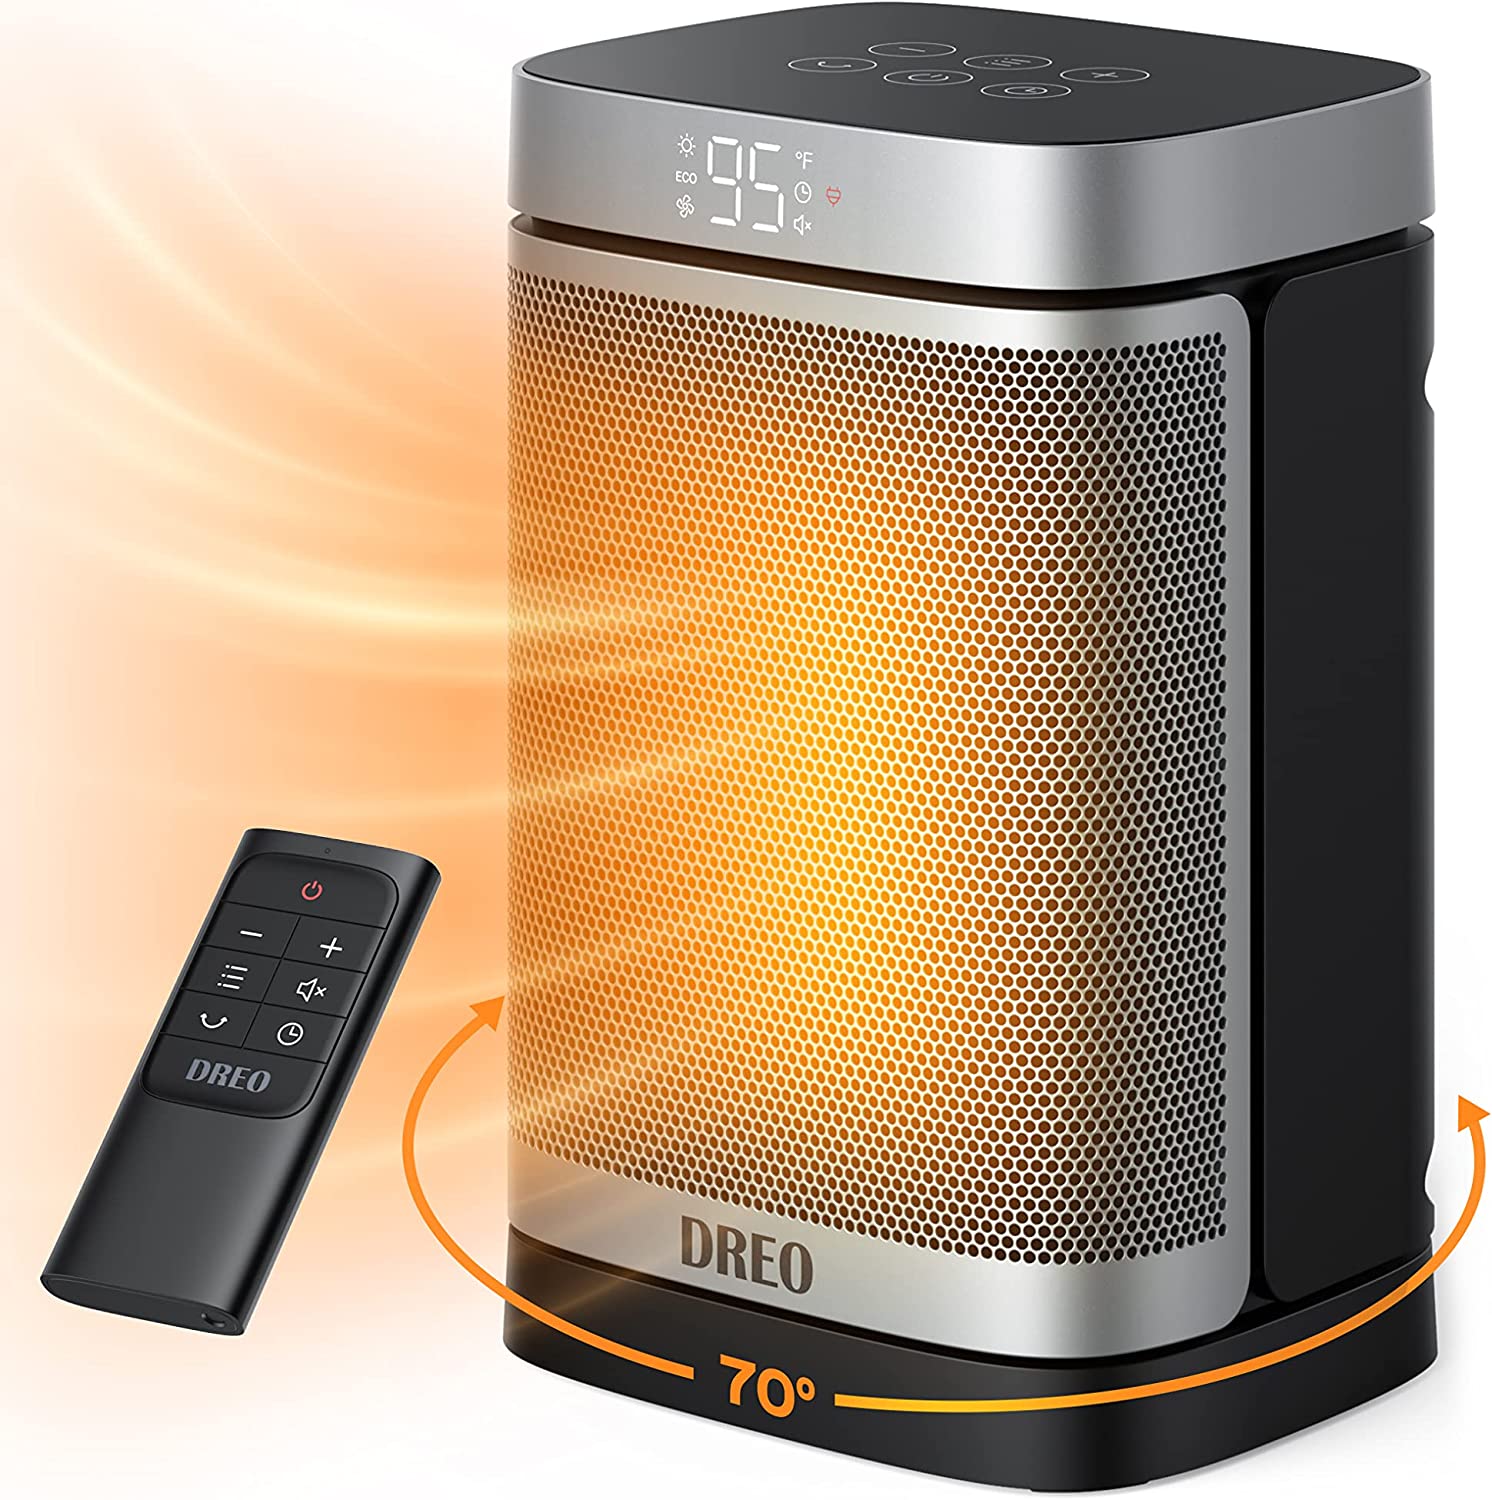 https://discounttoday.net/wp-content/uploads/2022/09/Dreo-Portable-Space-Heater-70%C2%B0Oscillating-Electric-Heaters-with-Digital-Thermostat.jpg